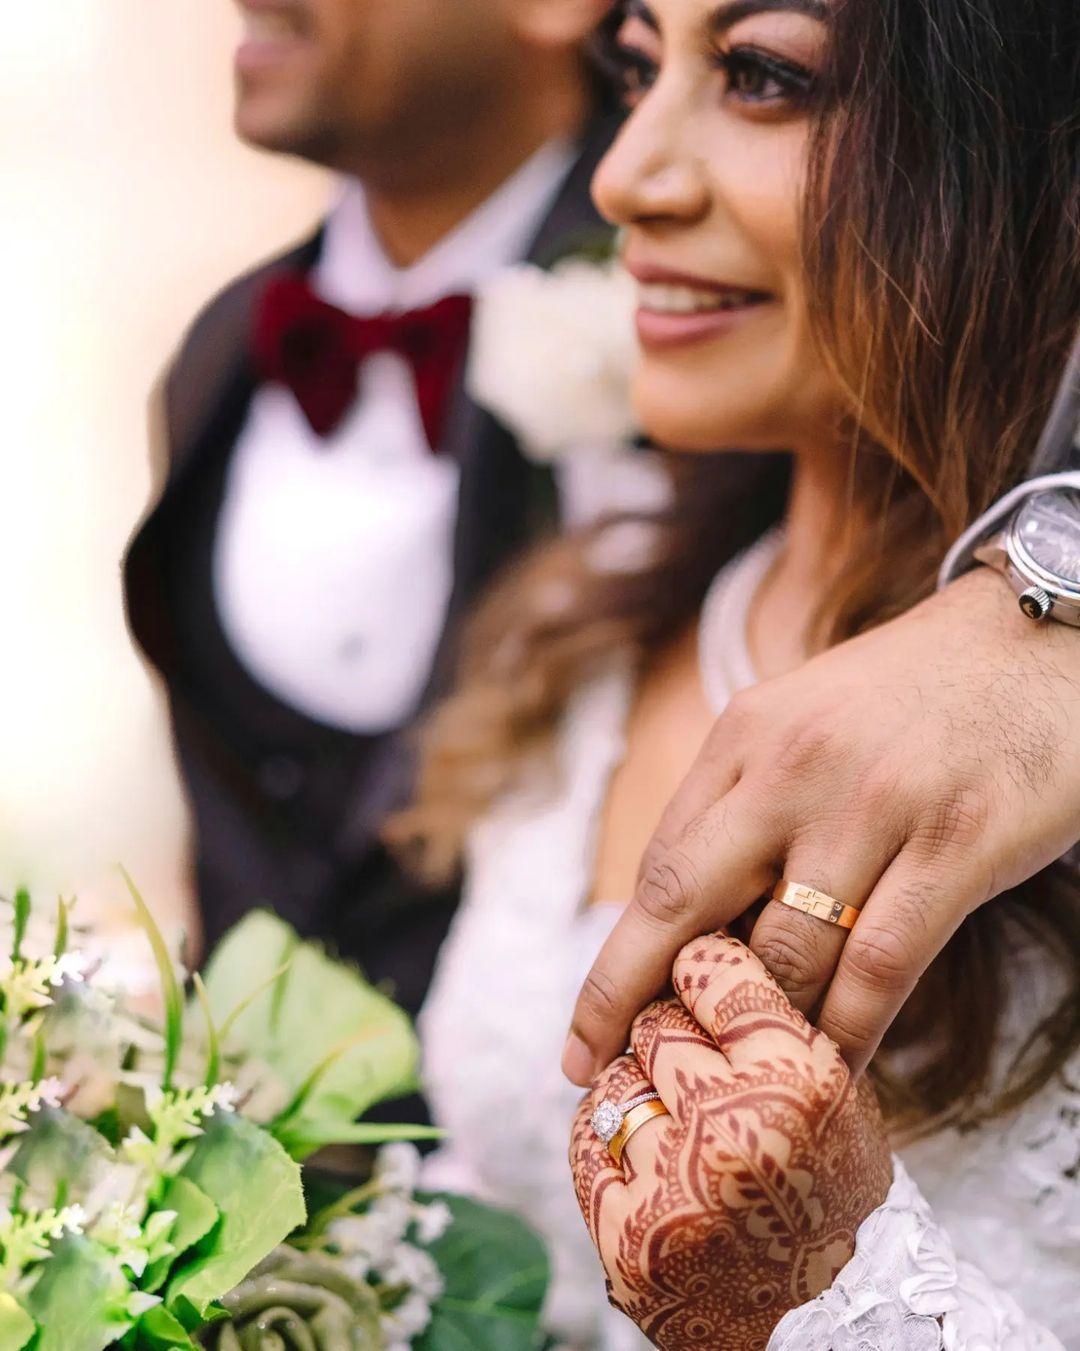 Ring Ceremony Essentials to Add to the Fun at Your Engagement Party - Event  Planning Ideas, Wedding Planning Tips | BookEventz Blog | Engagement photo  poses, Engagement pictures poses, Engagement portraits poses